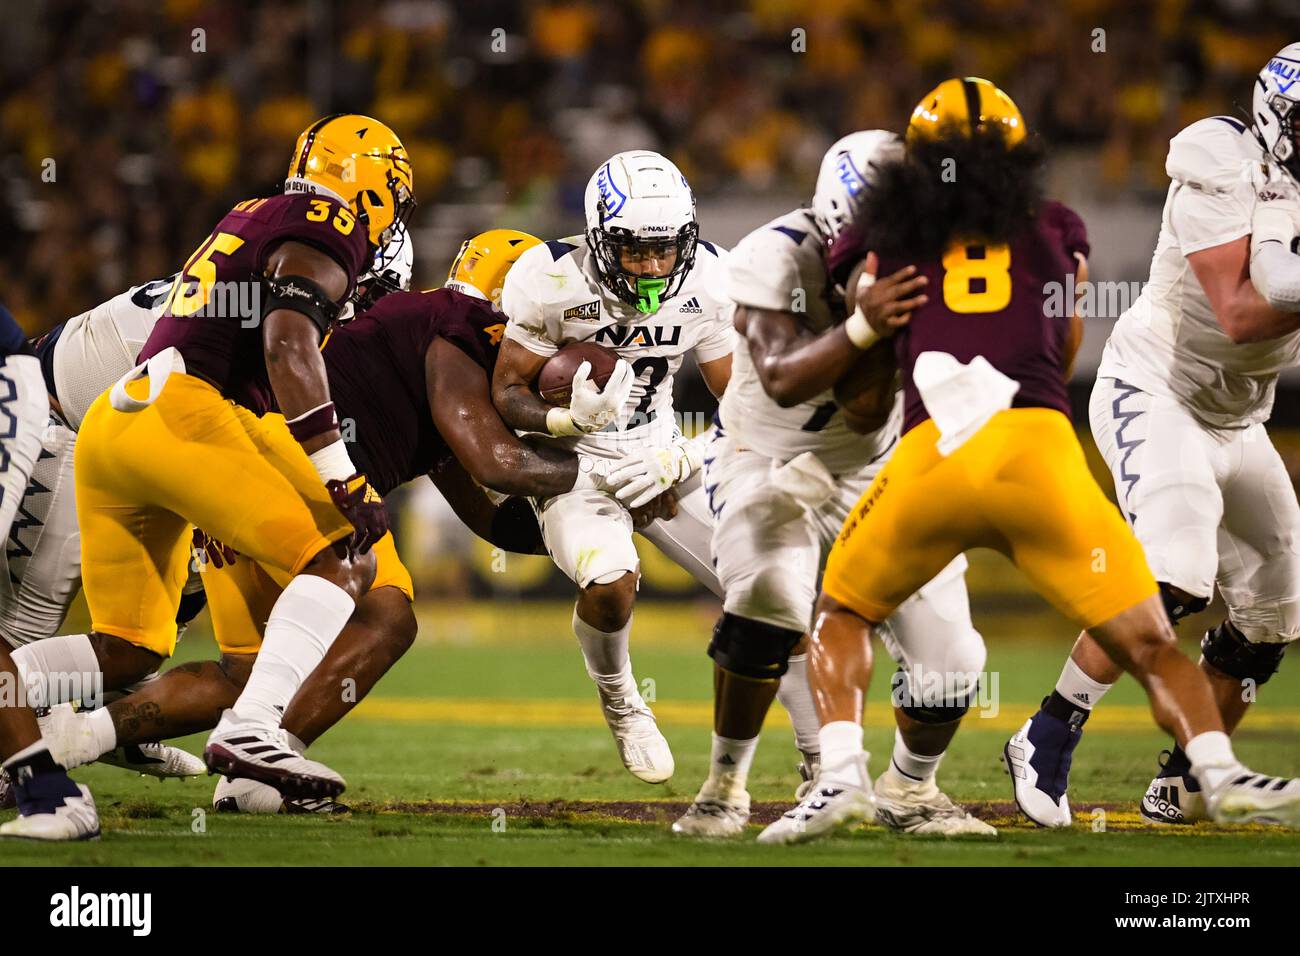 Northern Arizona running back Kevin Daniels (22) runs for a first down in the first quarter of an NCAA college football game against Arizona State in Stock Photo